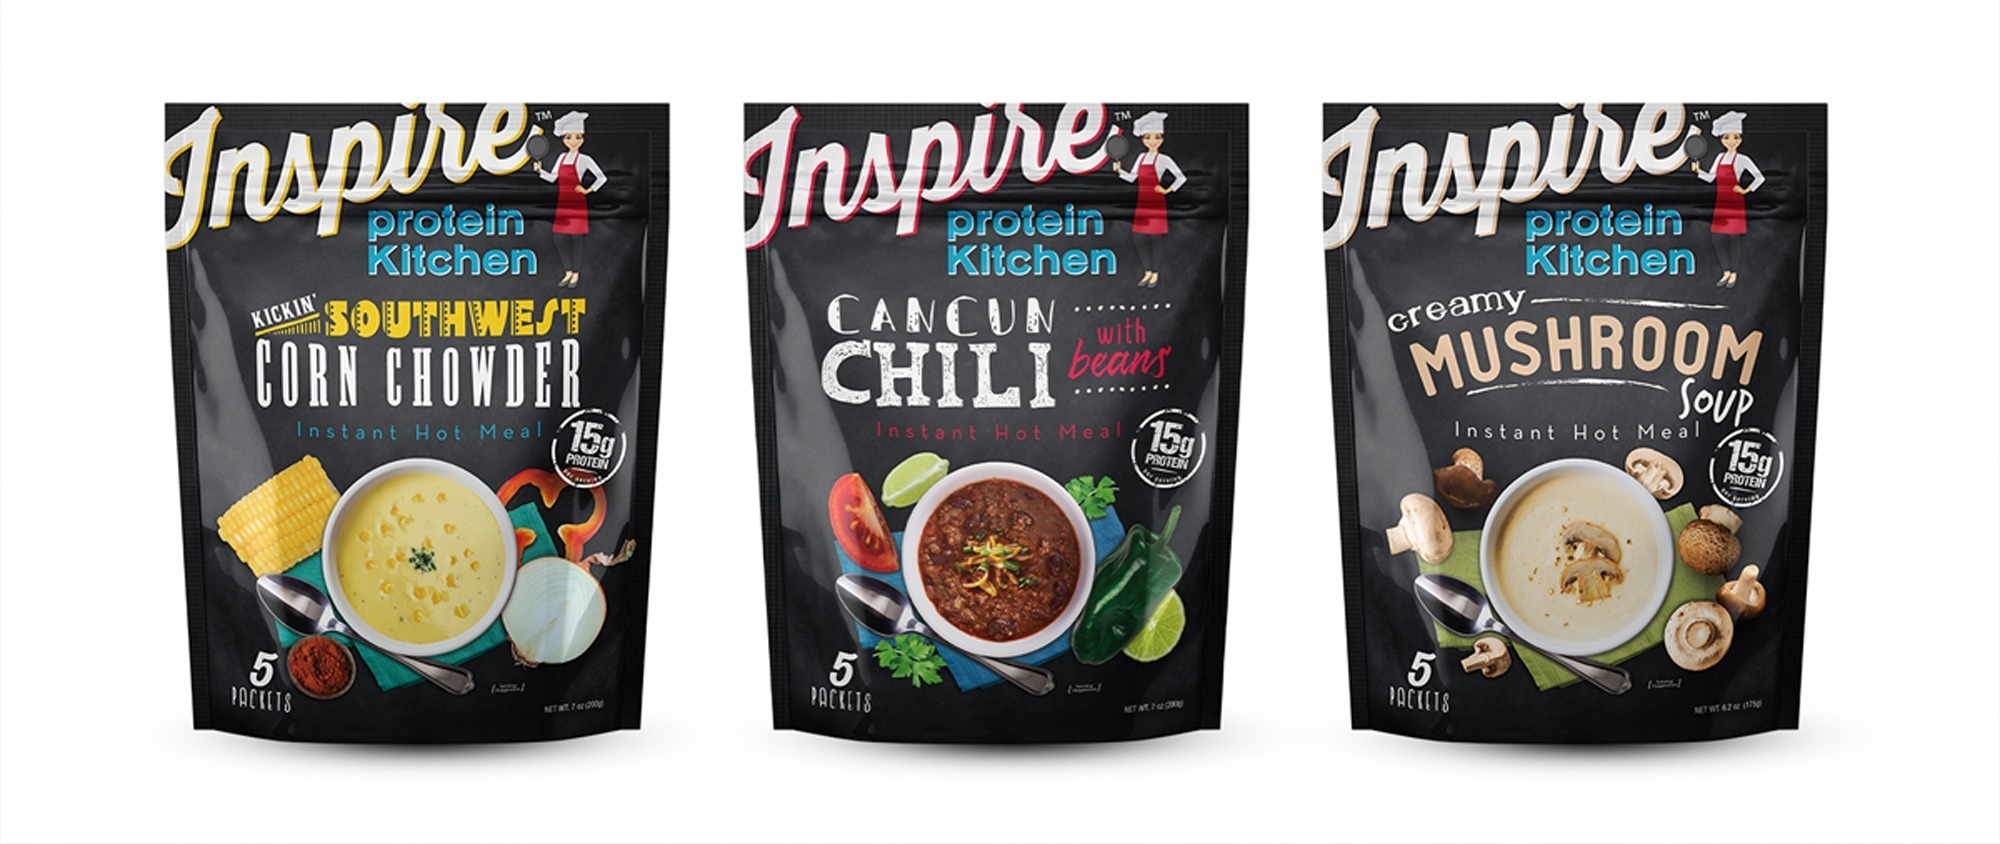 Bariatric Eating Inspire Protein Kitchen Package Design by Octane Advertising Design